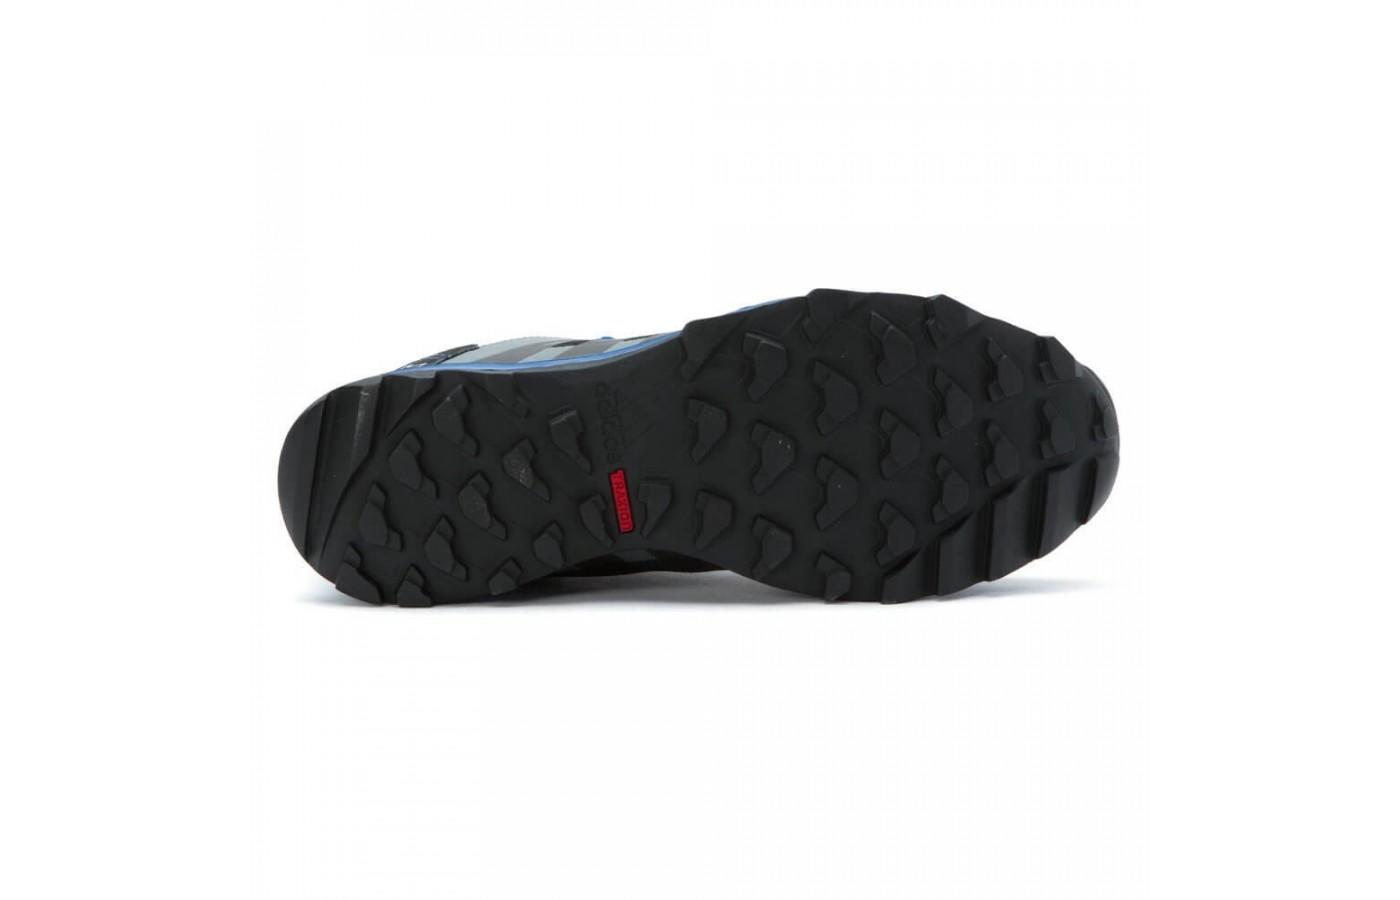 The arrow shaped lugs on the outsole create extra grip for maximum traction 